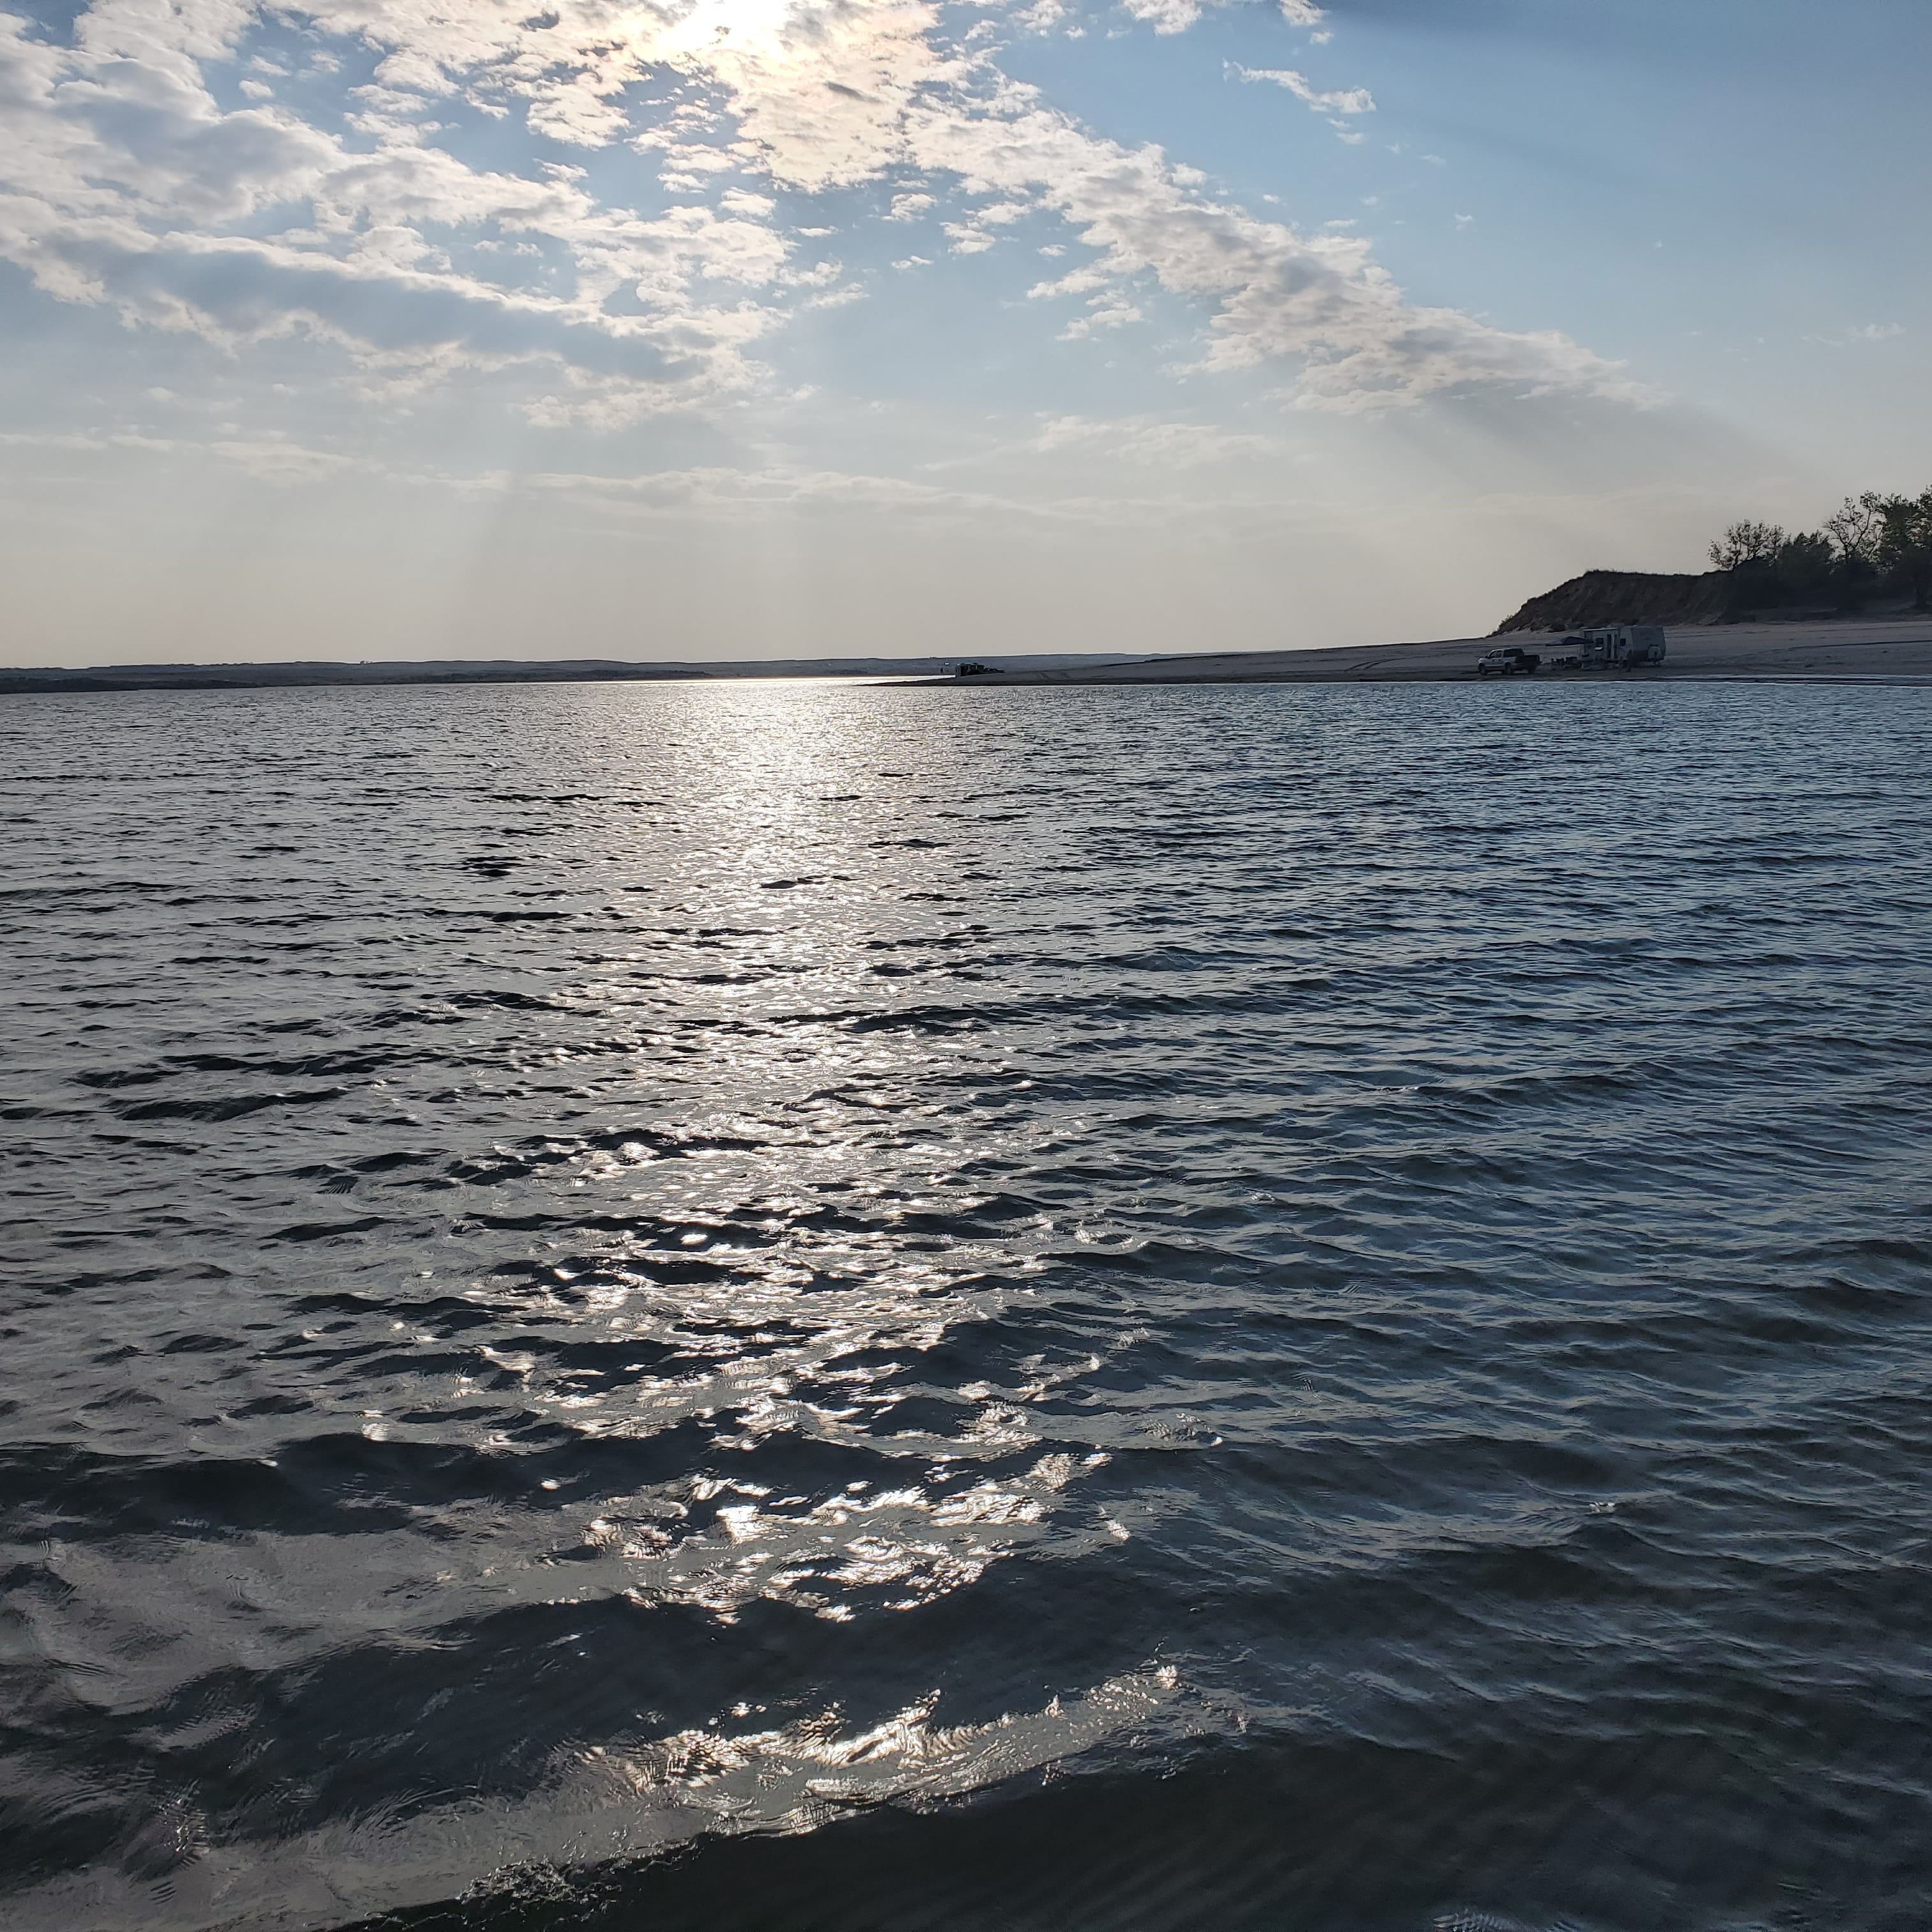 Camper submitted image from No Name Bay - Lake McConaughy - 2